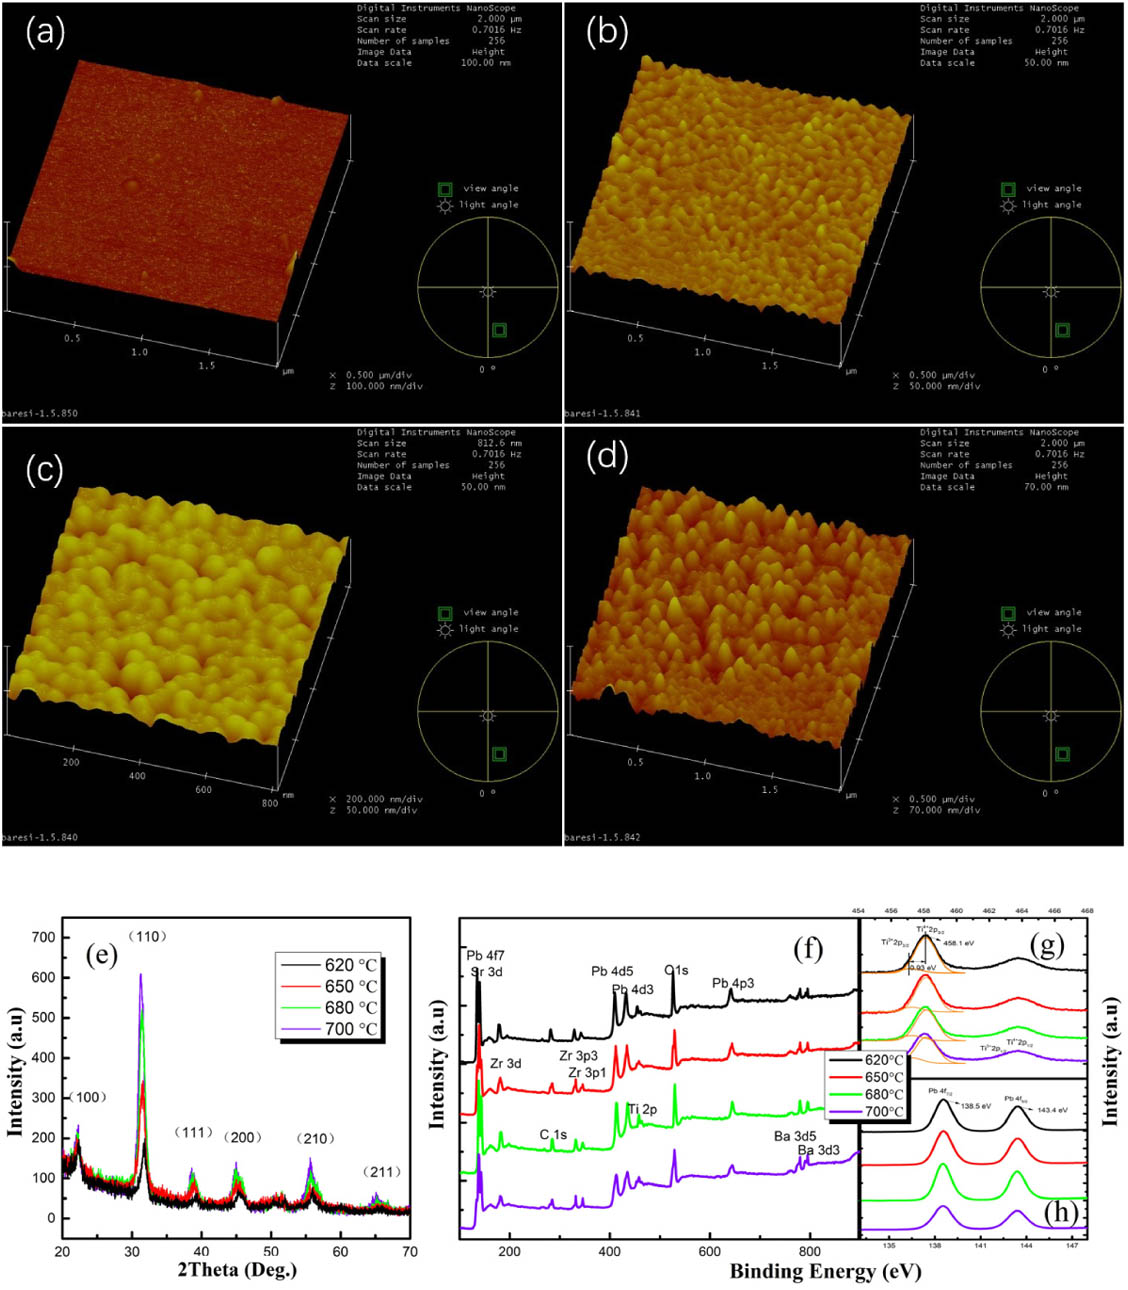 AFM images of four samples annealed at: (a) 620°C, (b) 650°C, (c) 680°C, and (d) 700°C. The scan areas are 2 μm×2 μm,2 μm×2 μm,0.8 μm×0.8 μm, and 2 μm×2 μm, correspondingly. (e) XRD spectra of four samples annealed at different temperatures. (f) XPS spectra of four samples annealed at different temperatures. (g) High-resolution Ti 2p XPS spectra; orange lines are the fitted Gaussian curves. (h) High-resolution Pb 4f XPS spectra.